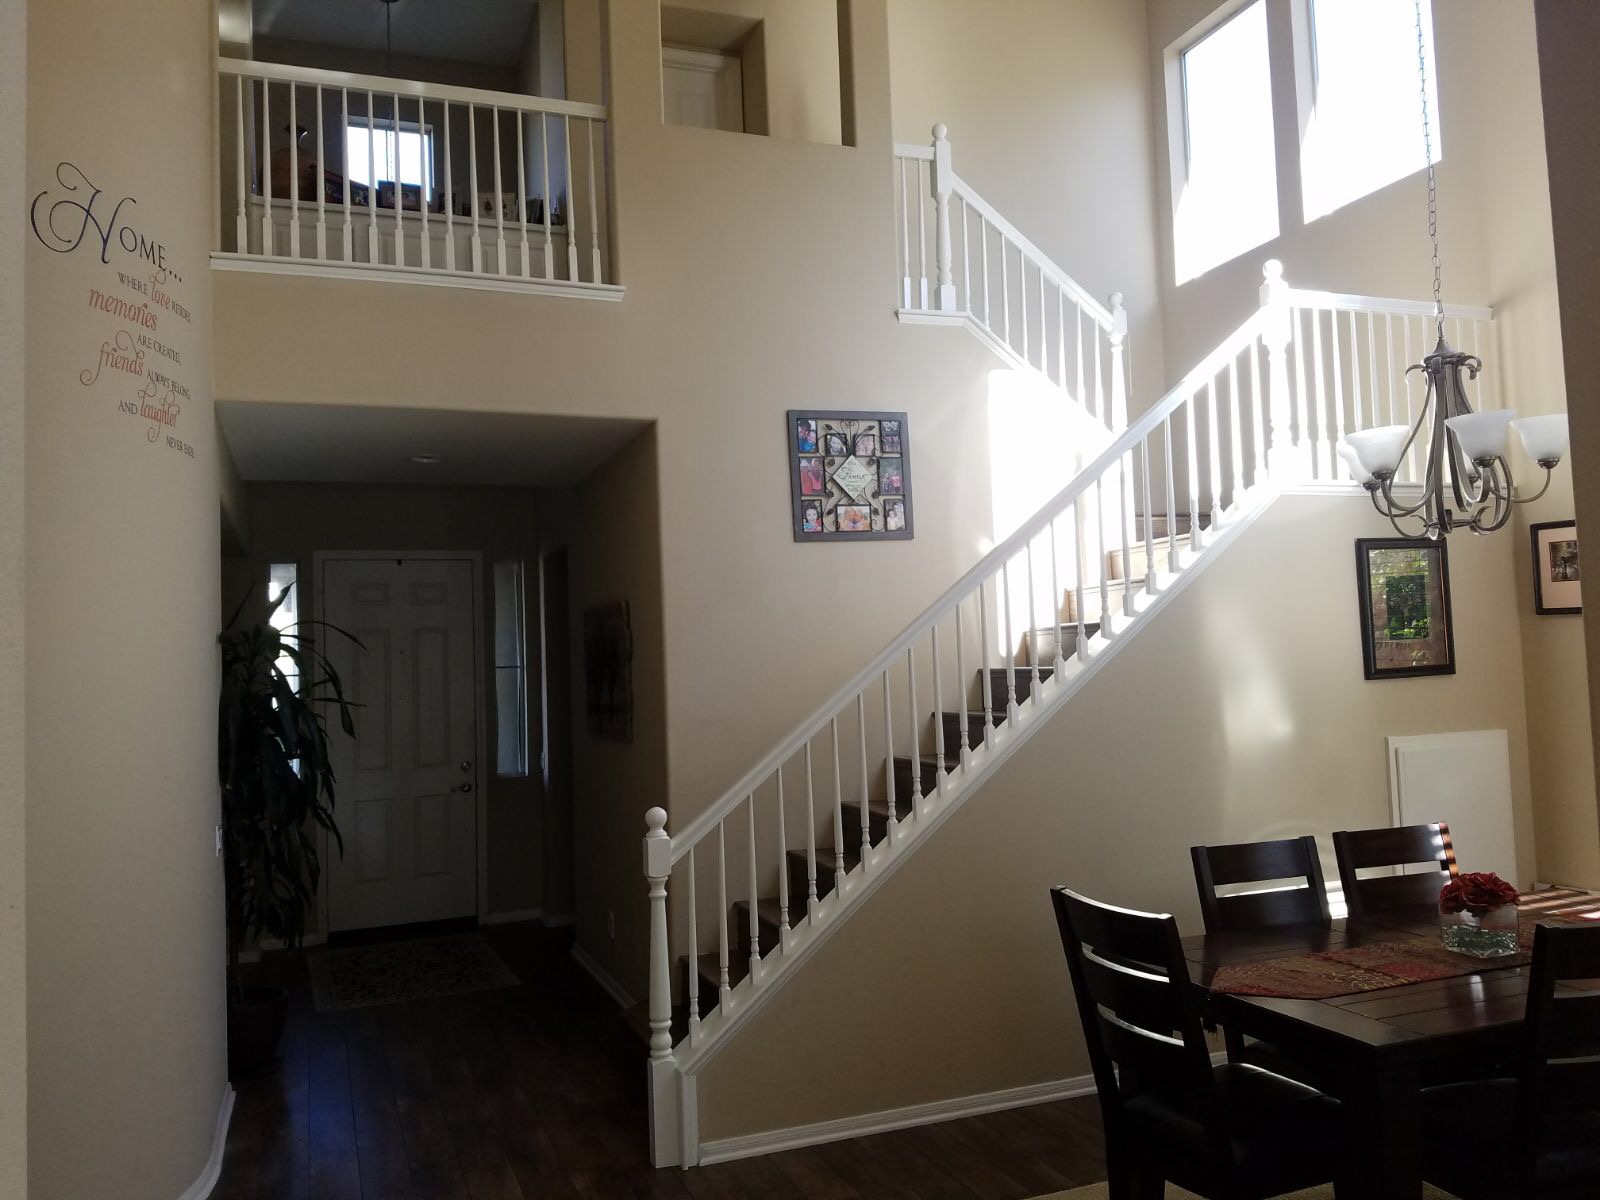 CertaPro Painters the Interior house painting experts in San Marcos, CA